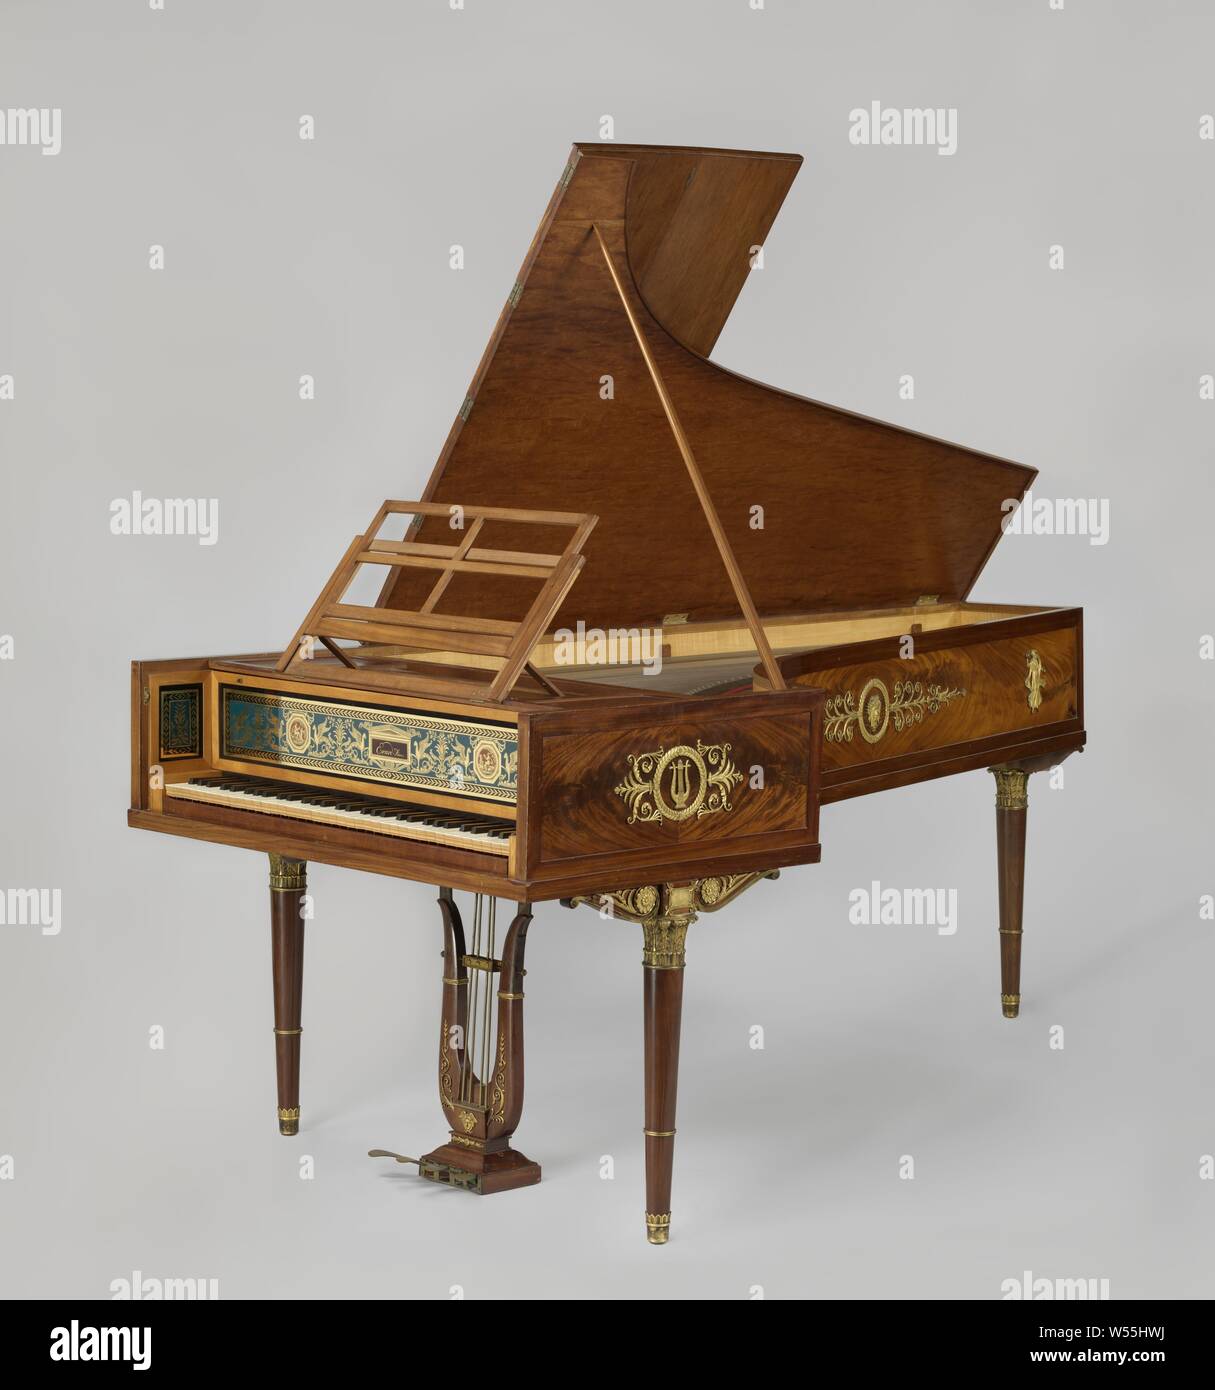 Pianoforte, grand piano in Empire style, made of mahogany with gilt bronze fittings and a lyre-shaped voice at the pedals., Erard Frères, 1808, spruce (wood), mahogany (wood), ivory, ebony (wood), brass (alloy), glass, bronze (metal), gilding (material), gilding, h 93.0 cm × w 110.0 cm × l 225.0 cm Stock Photo